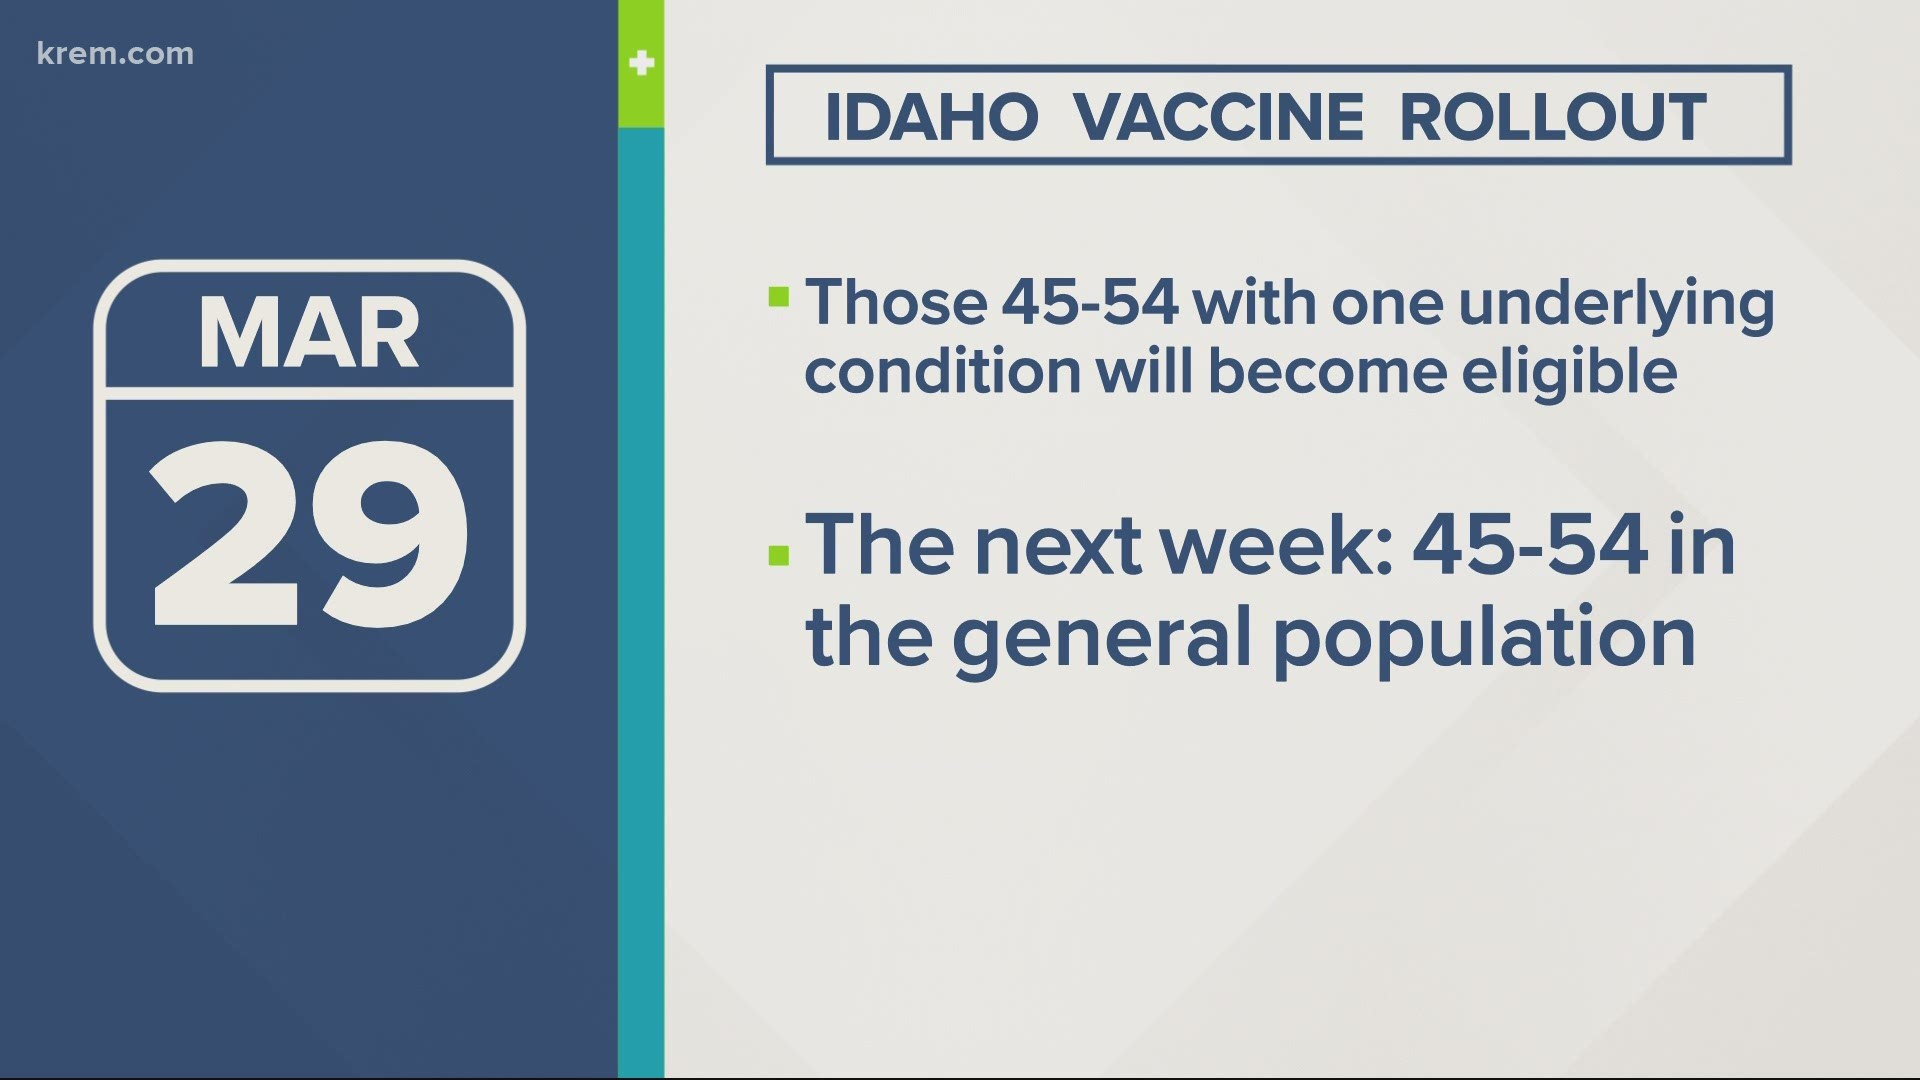 Idaho's COVID-19 Vaccine Advisory Committee voted to approve a plan that would allow all Idahoans age 16-44 to be eligible for vaccination by the end of April.